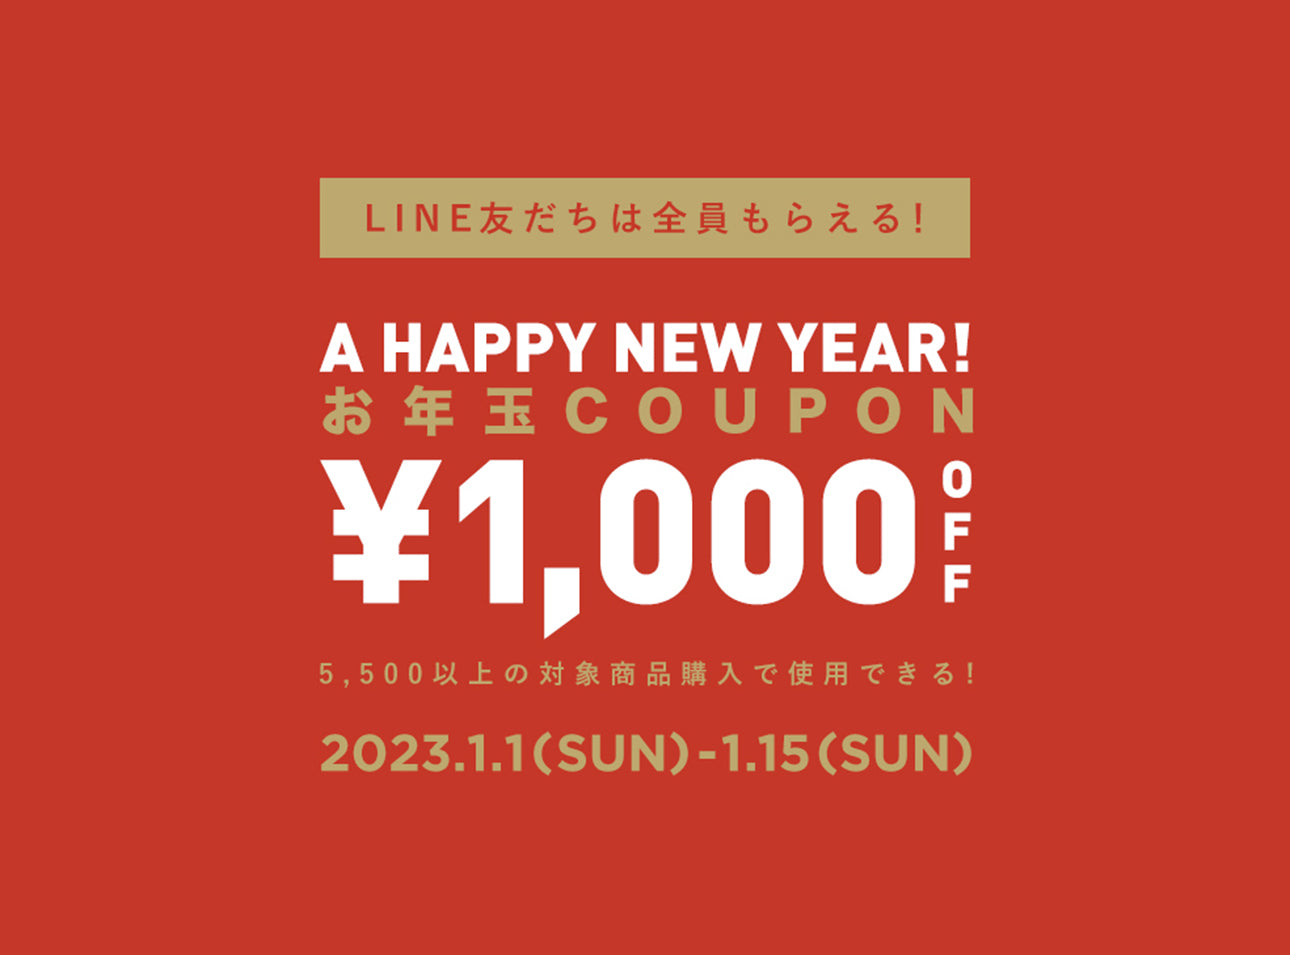 NEW YEAR SPECIAL COUPON CAMPAIGN